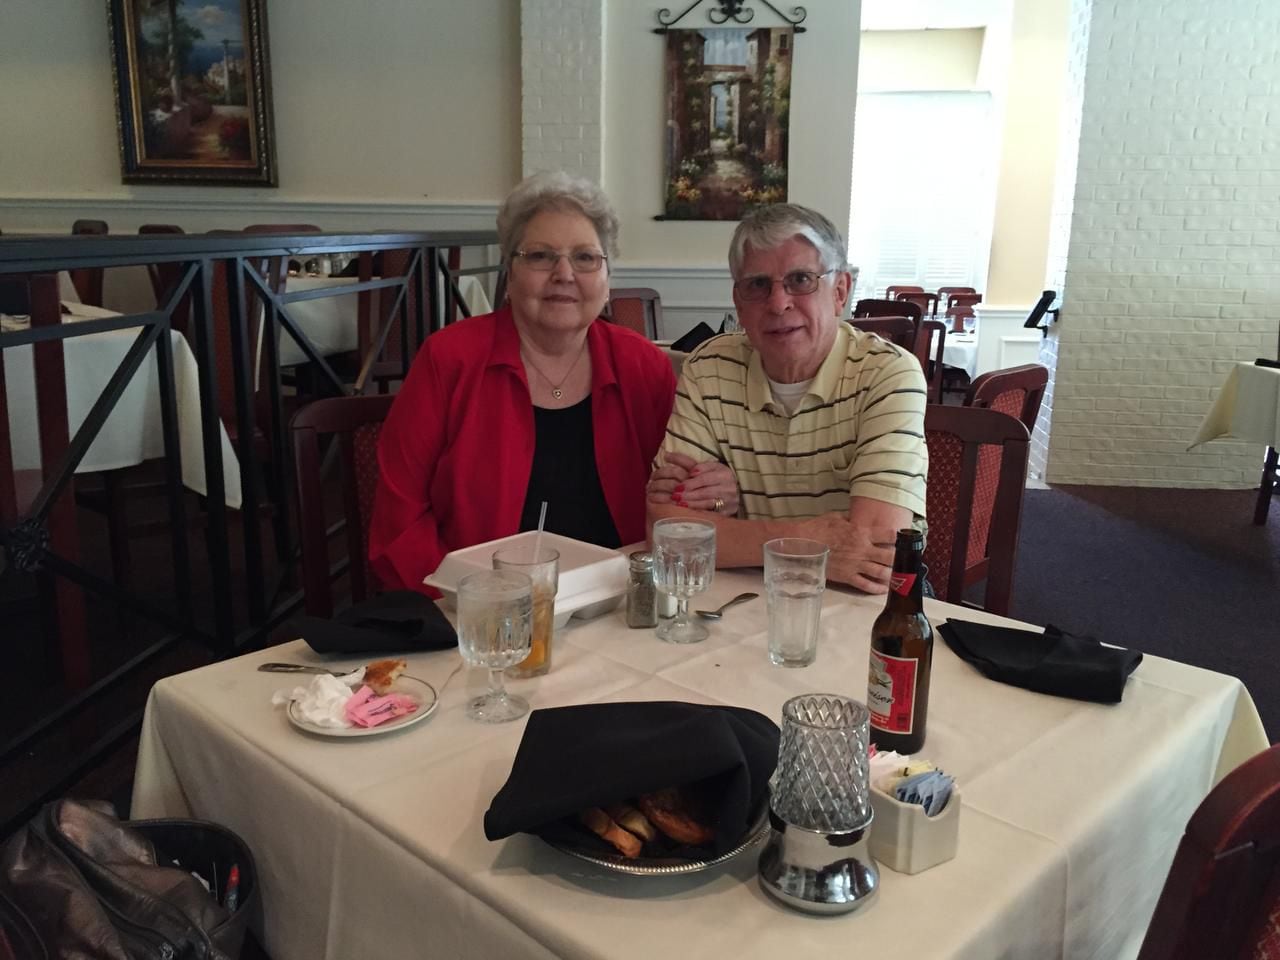 
Elizabeth and George Epps of Carrollton have lunch at Vincent’s Seafood in Plano on July 27.
